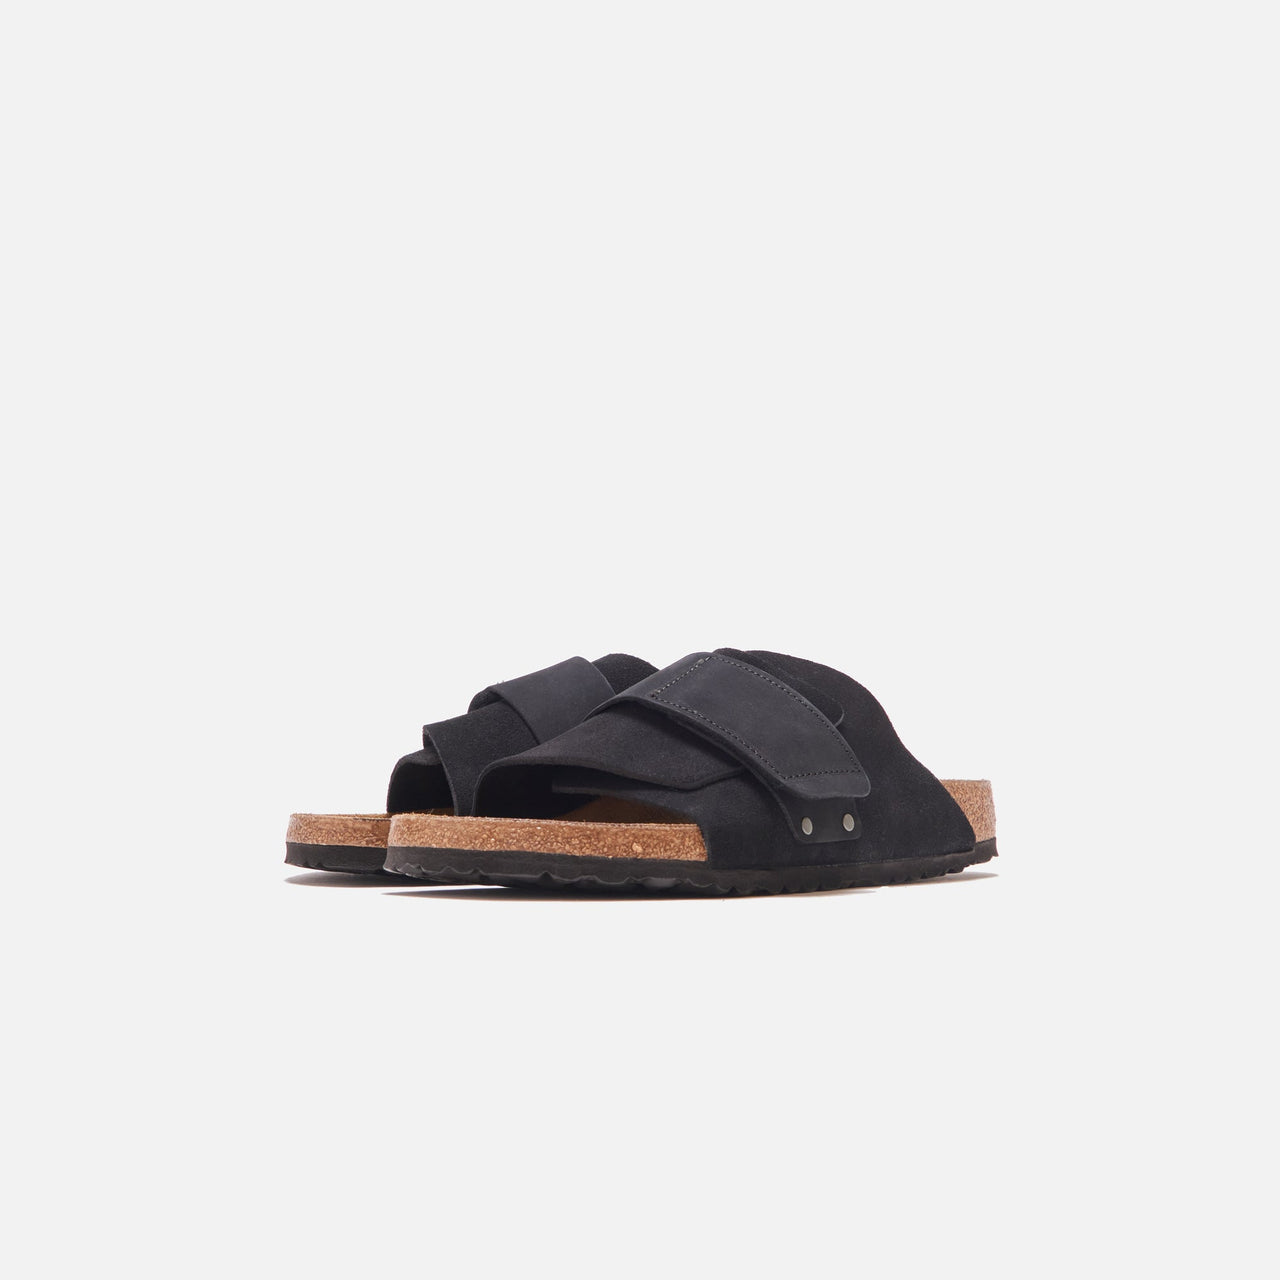 Stylish and comfortable Birkenstock Kyoto Suede Black sandal for women